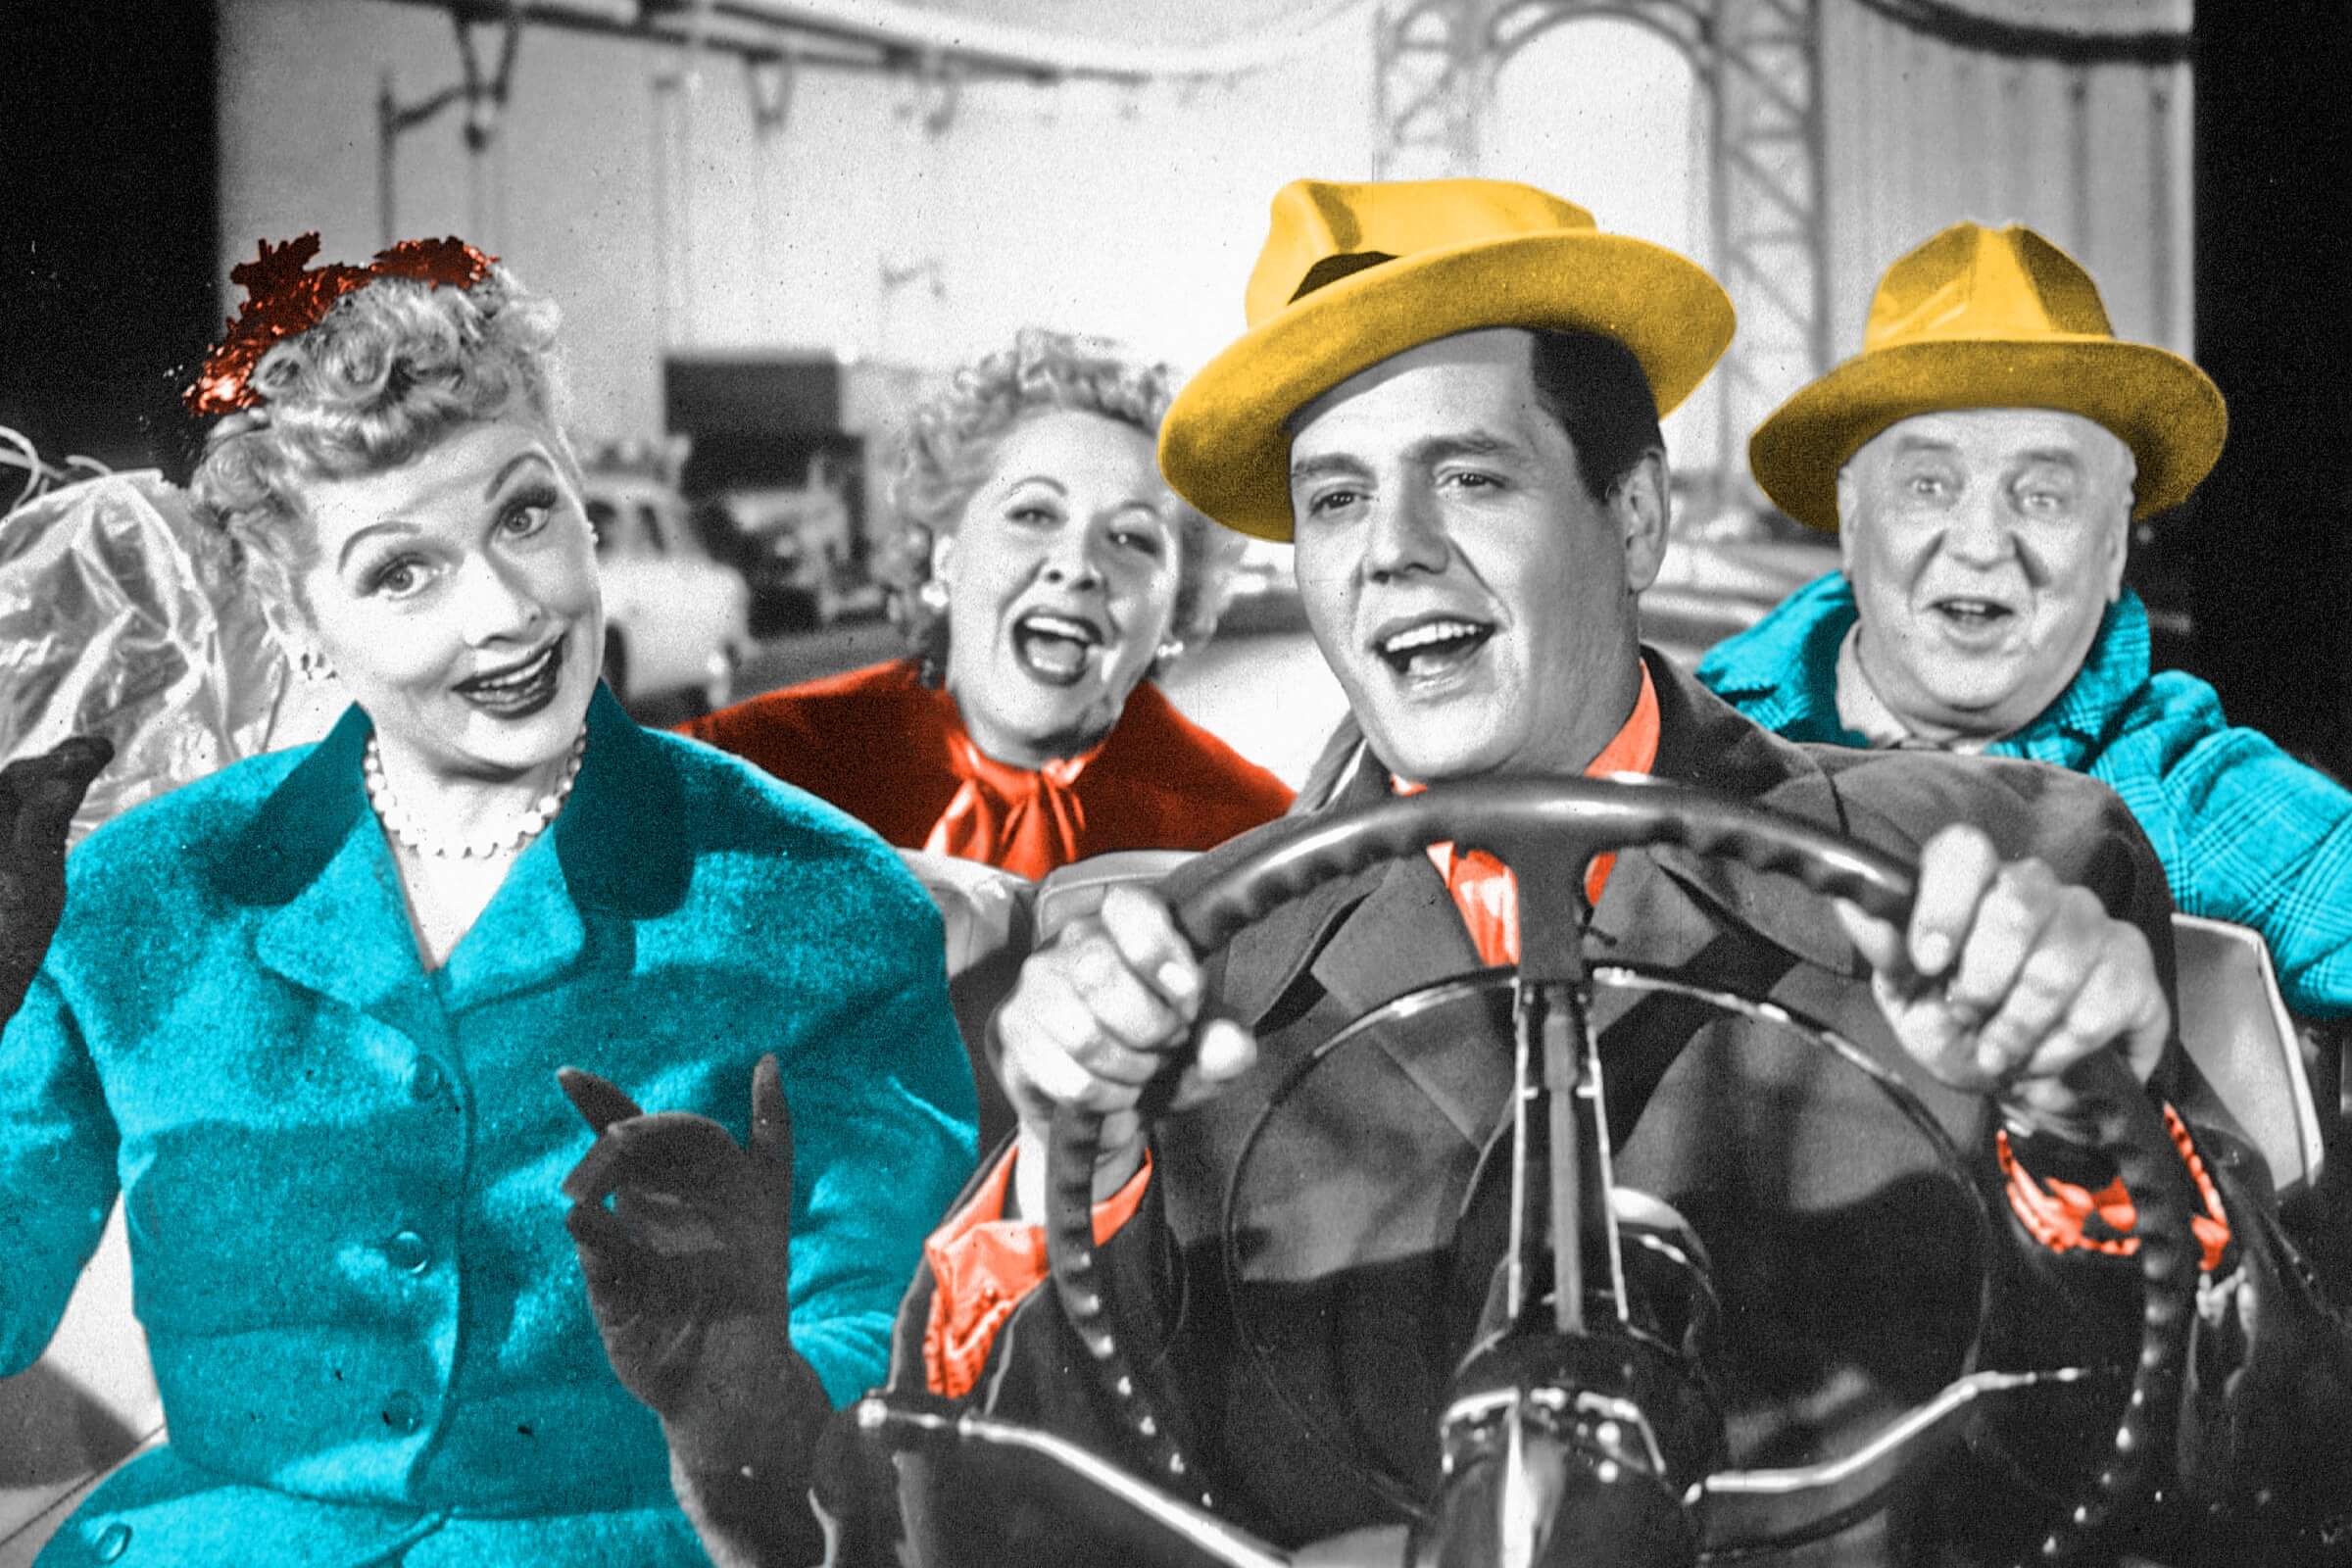 13 Surprising Facts About “I Love Lucy”